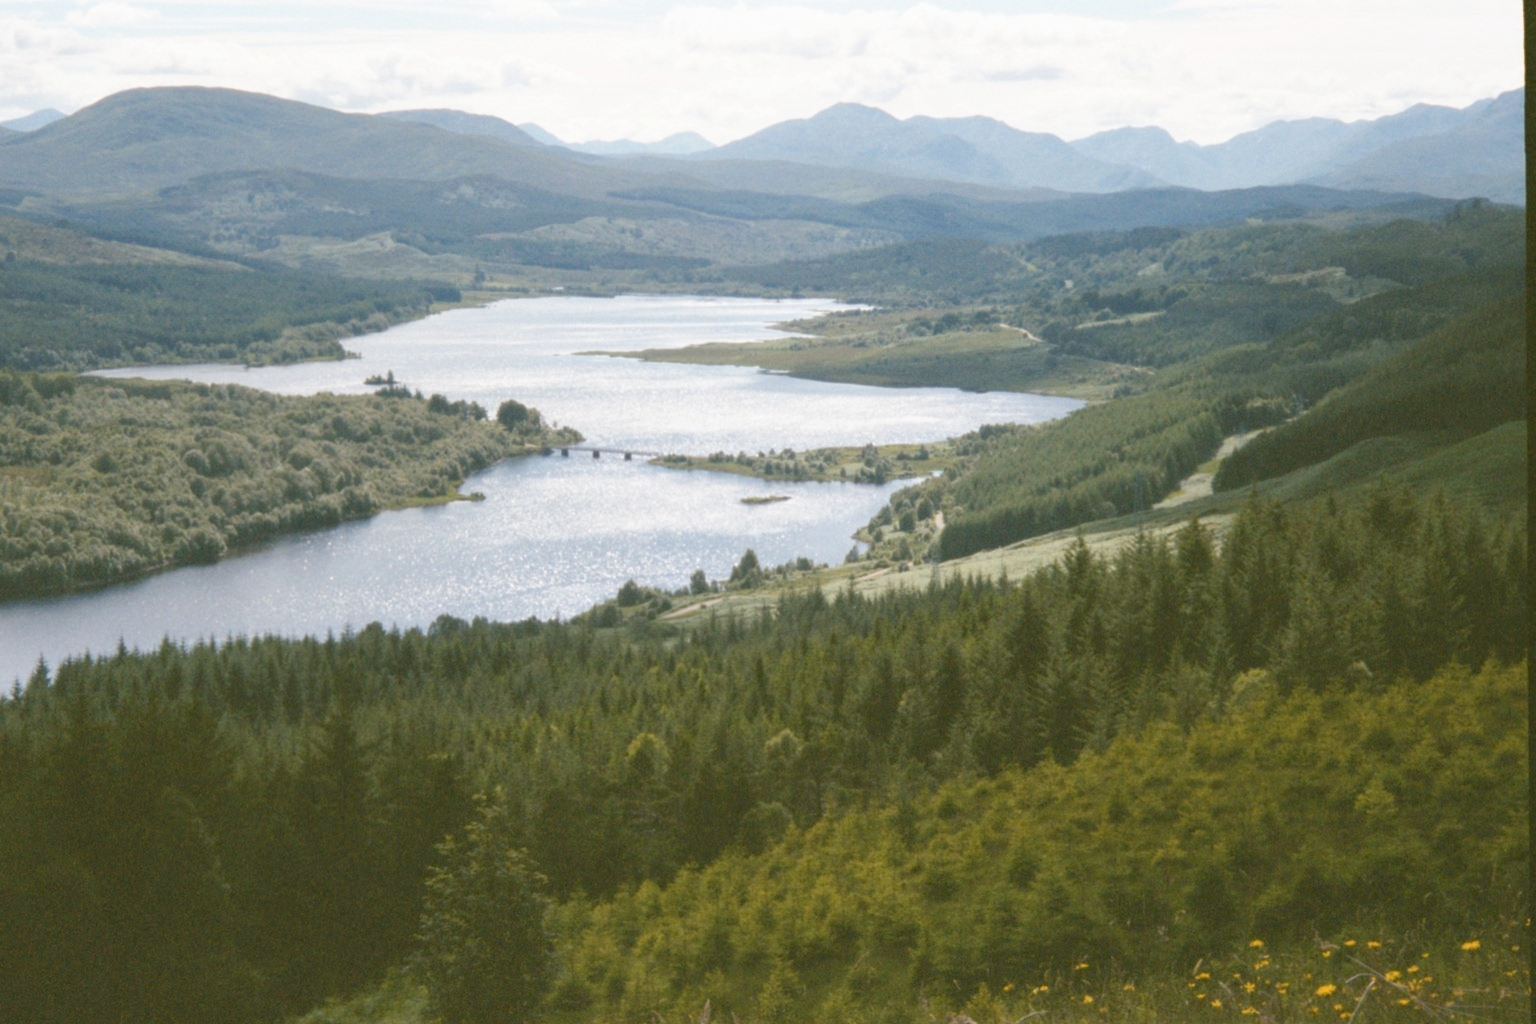 View of a river in the highlands of Scotland